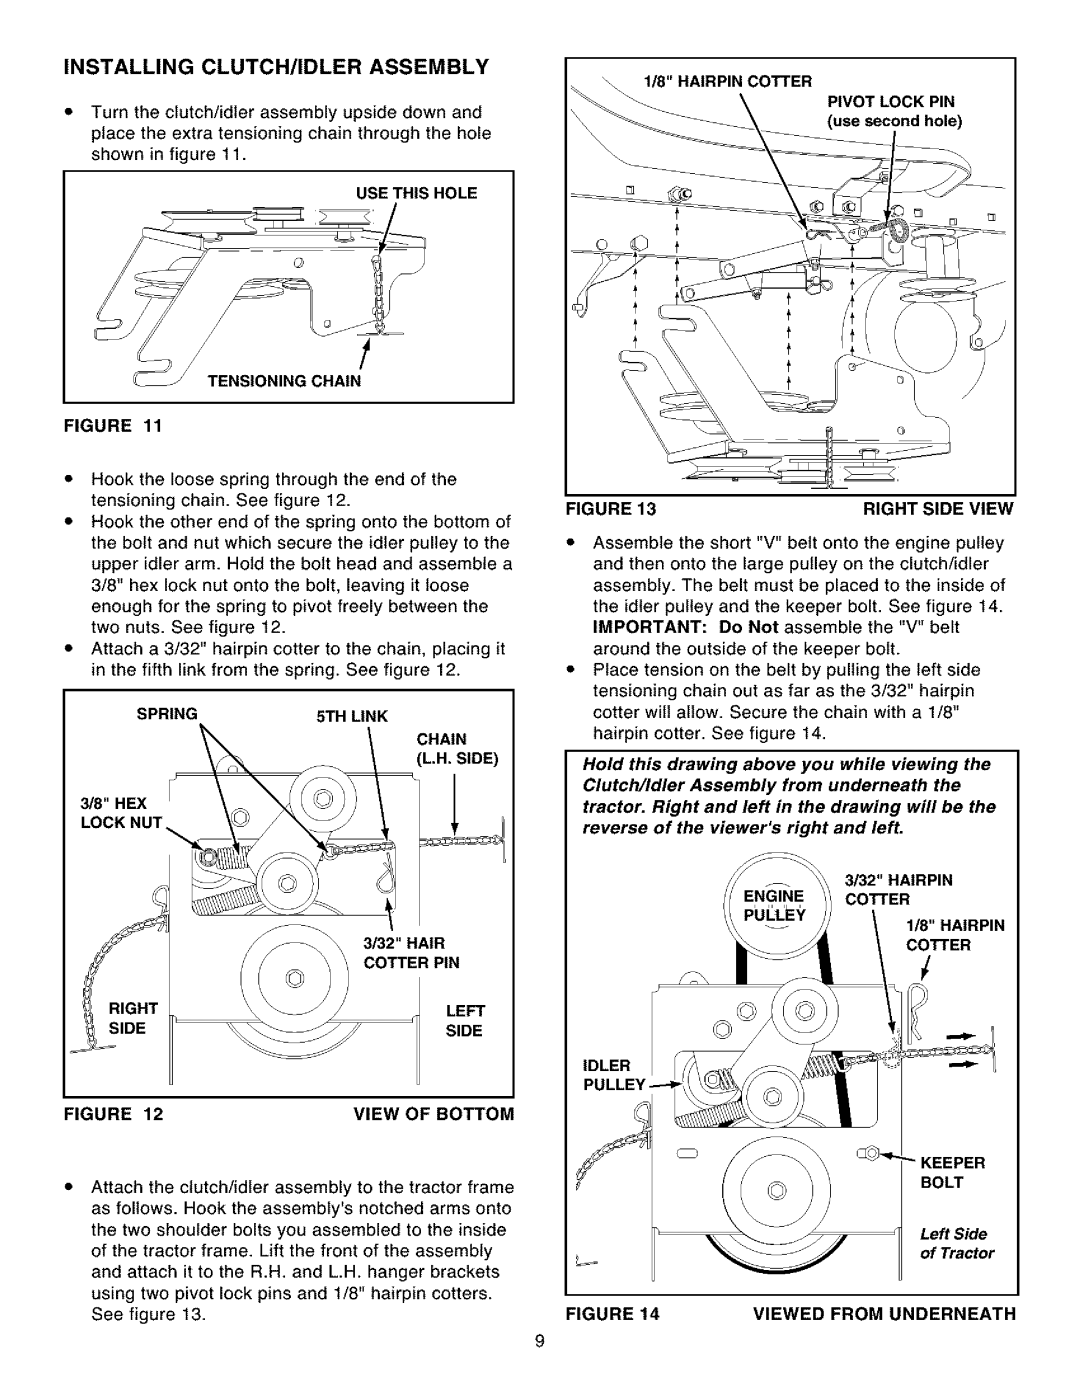 Craftsman 486.248531 owner manual Installing Clutch/Idler Assembly, View Of Bottom, Right Side View, Viewed From Underneath 